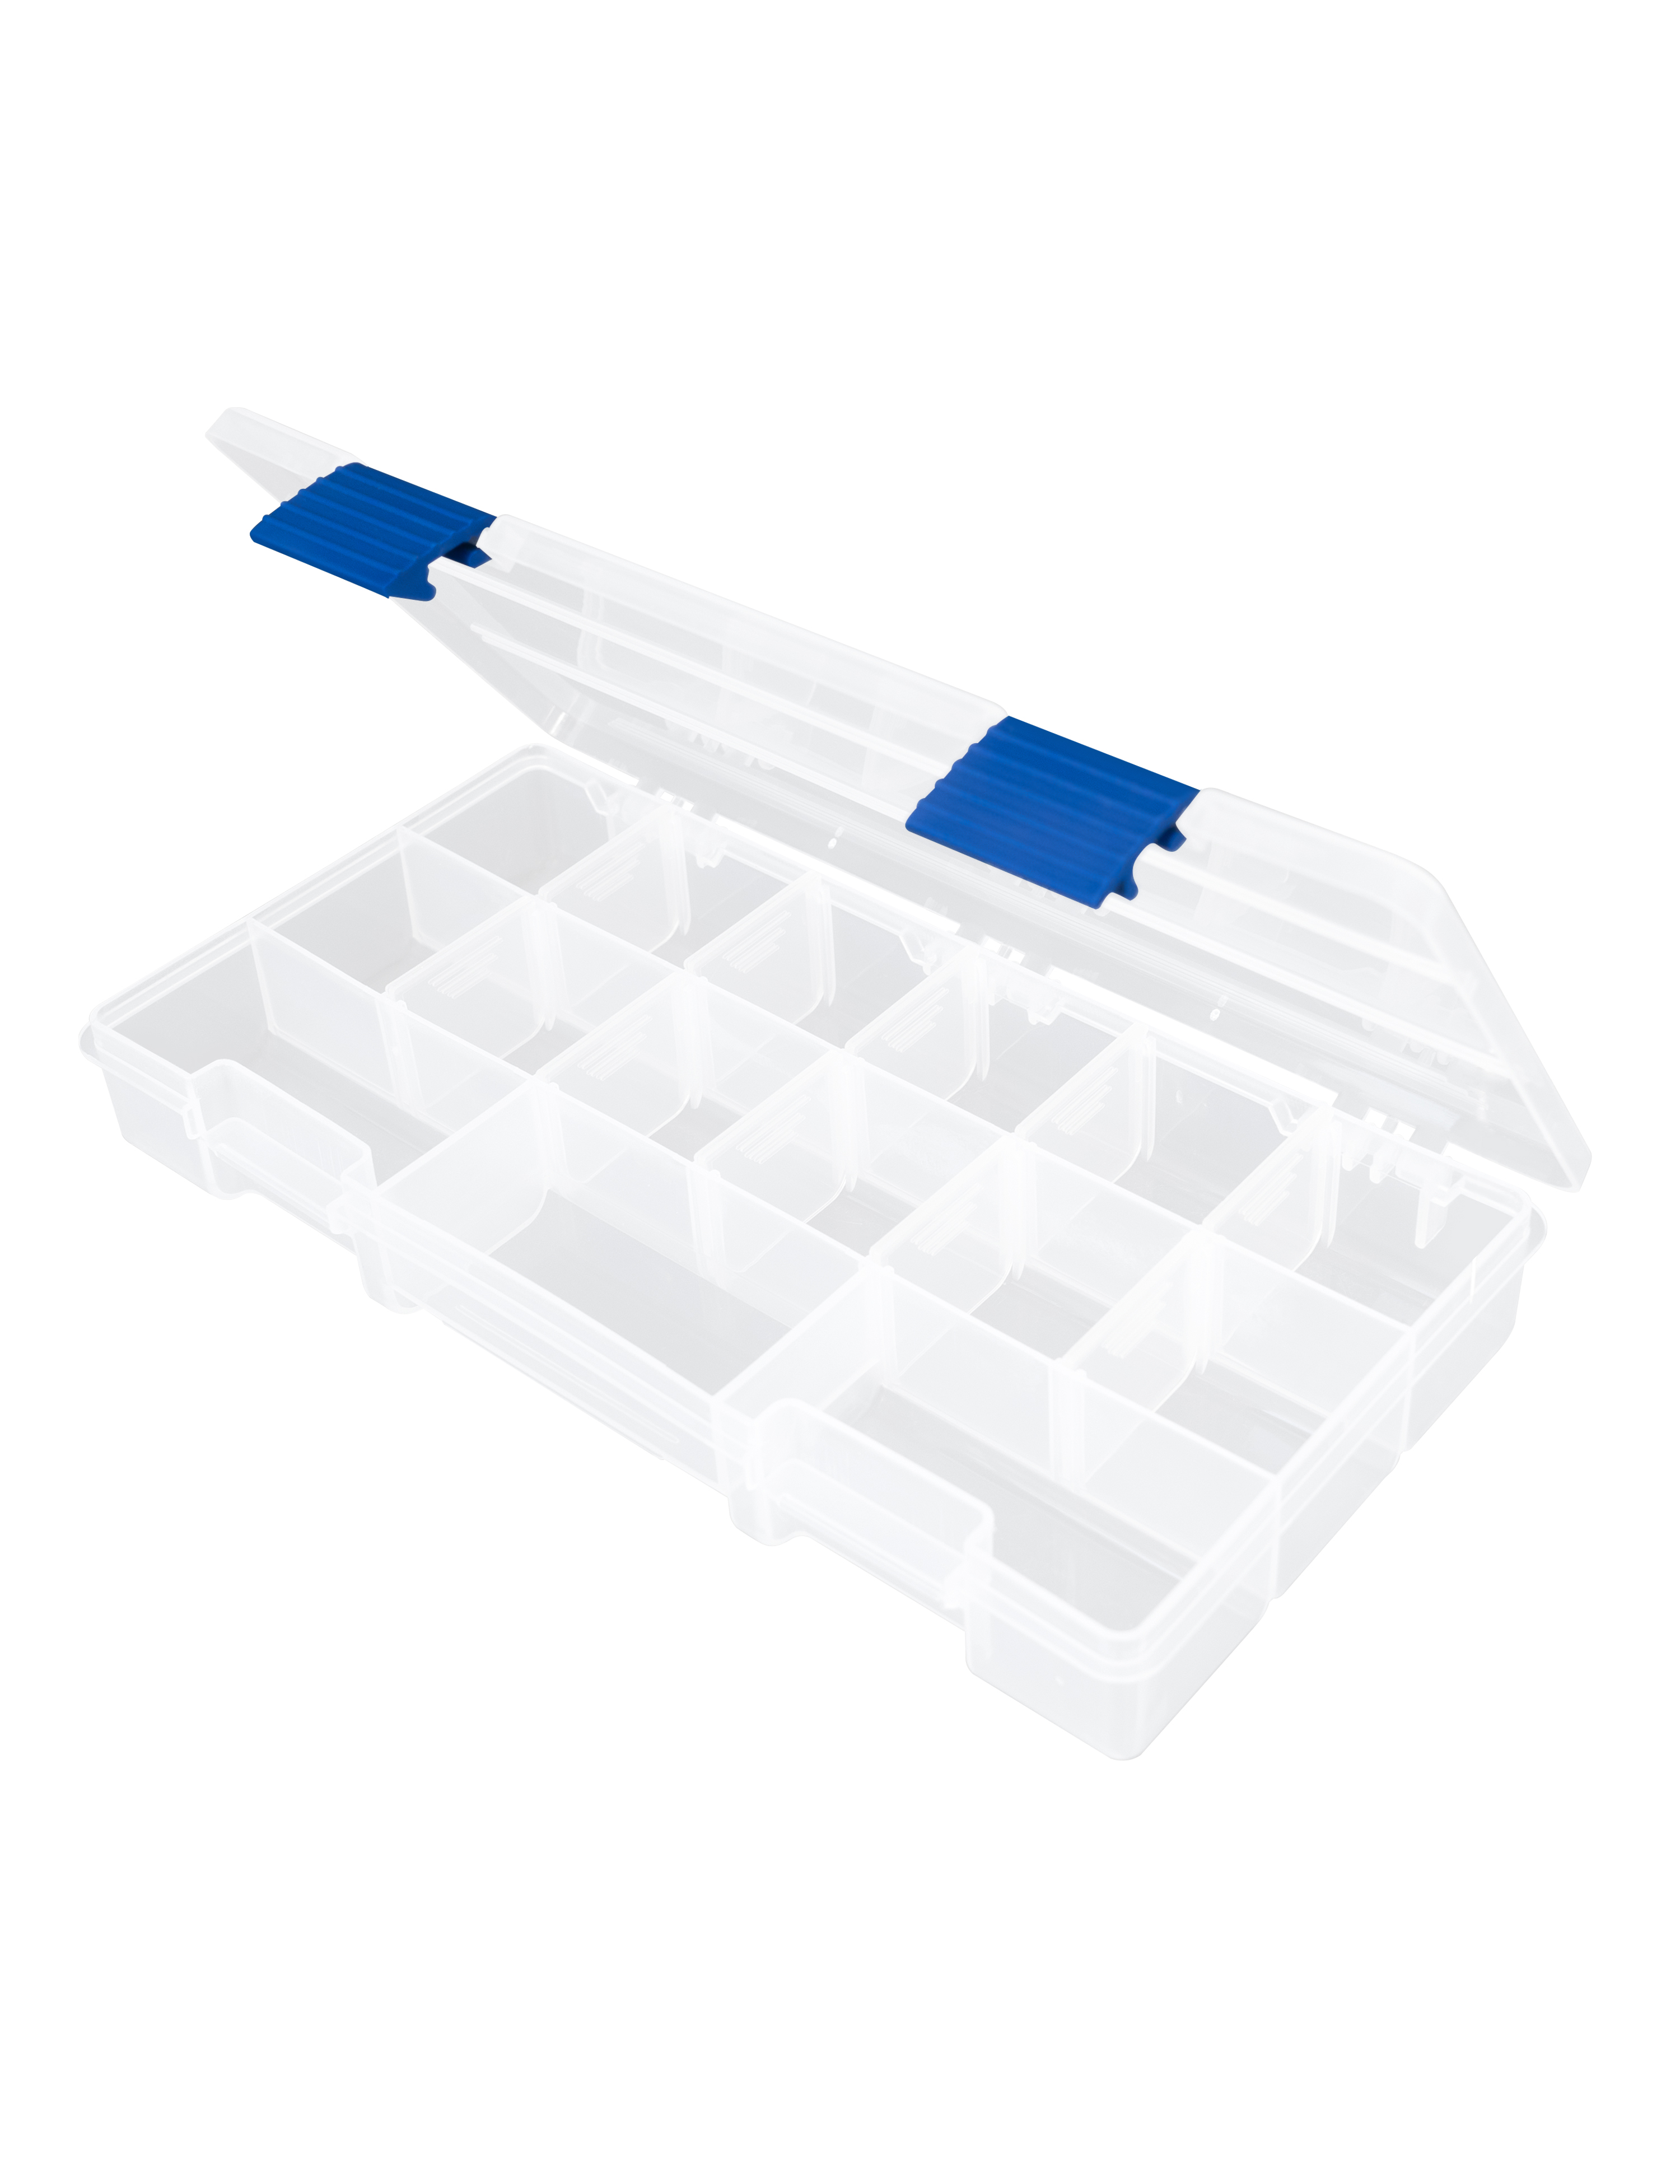 BLUEWING Tackle Storage Tray Durable Waterproof Adjustable Compartments